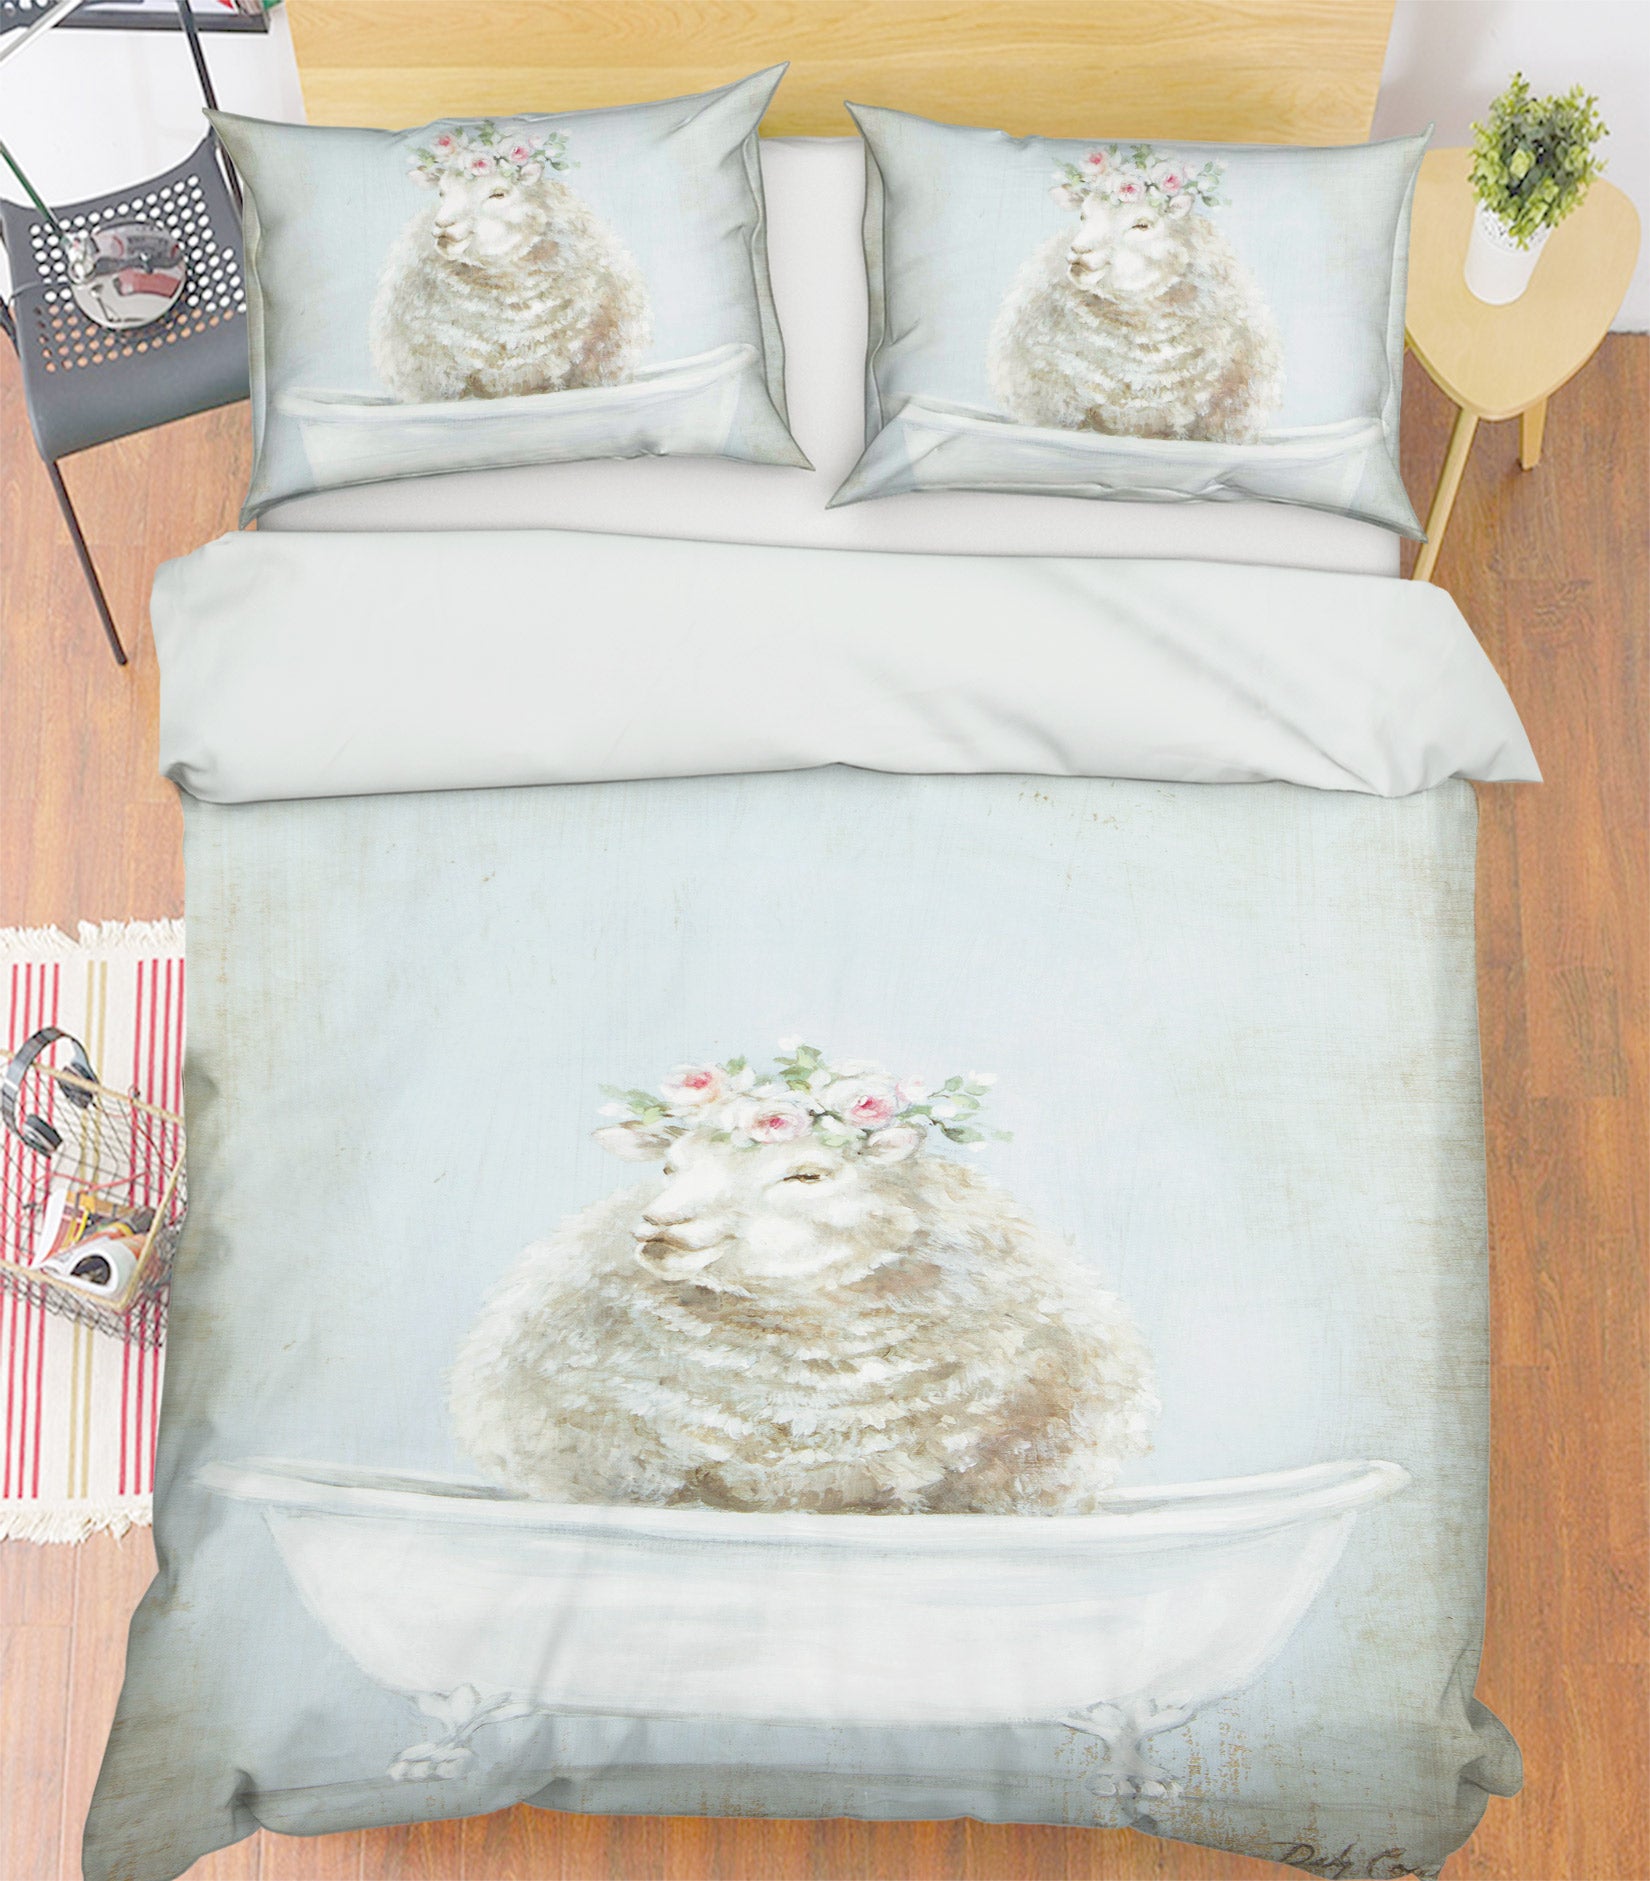 3D Wreathed Sheep Bathtub 2141 Debi Coules Bedding Bed Pillowcases Quilt